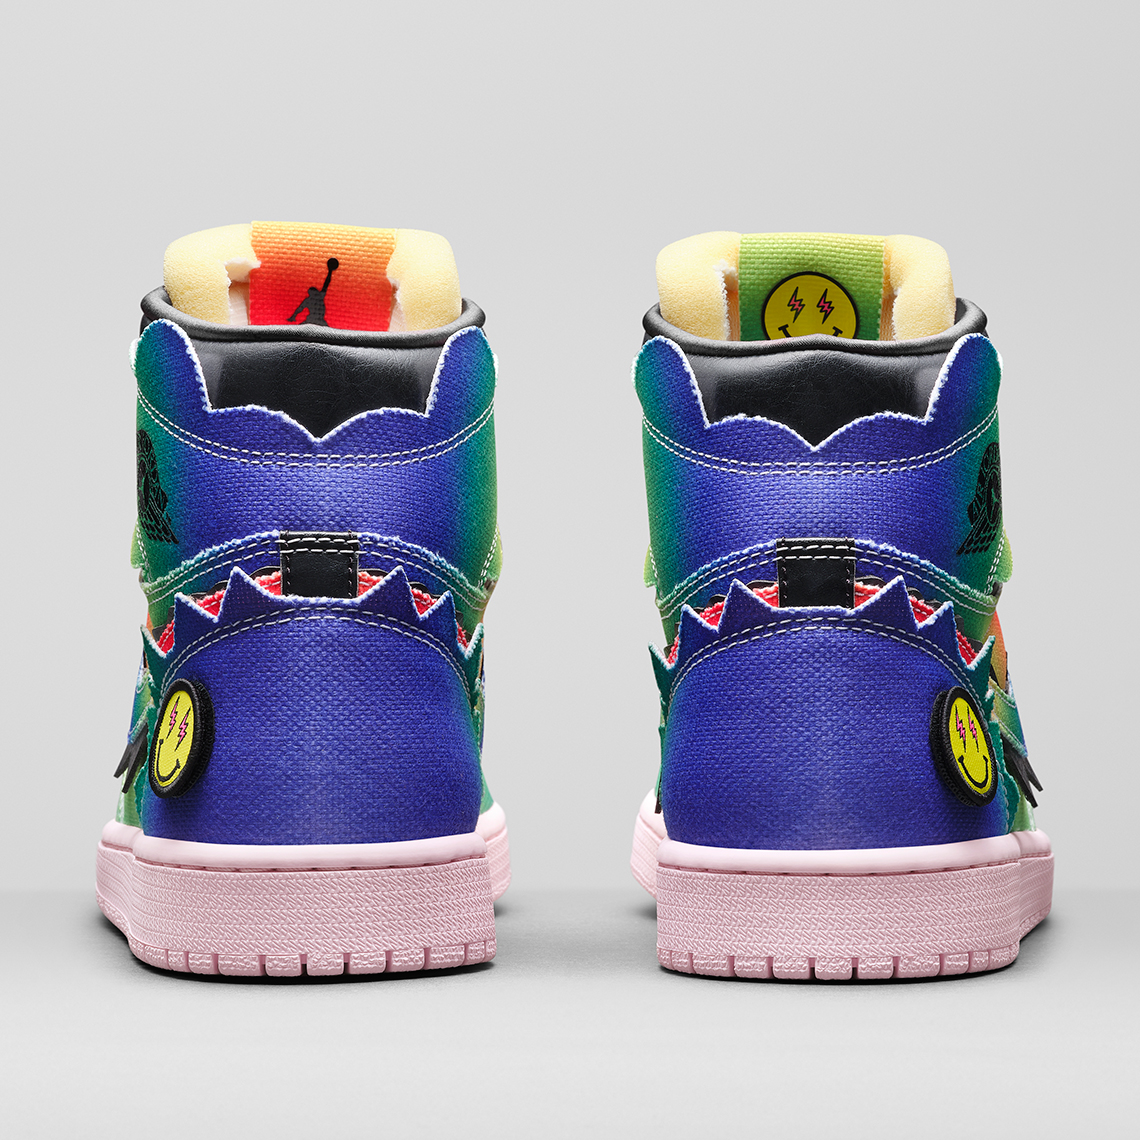 J Balvin One of the best Jordan legacy silhouettes in a decade Colores Vibras Release Date 2